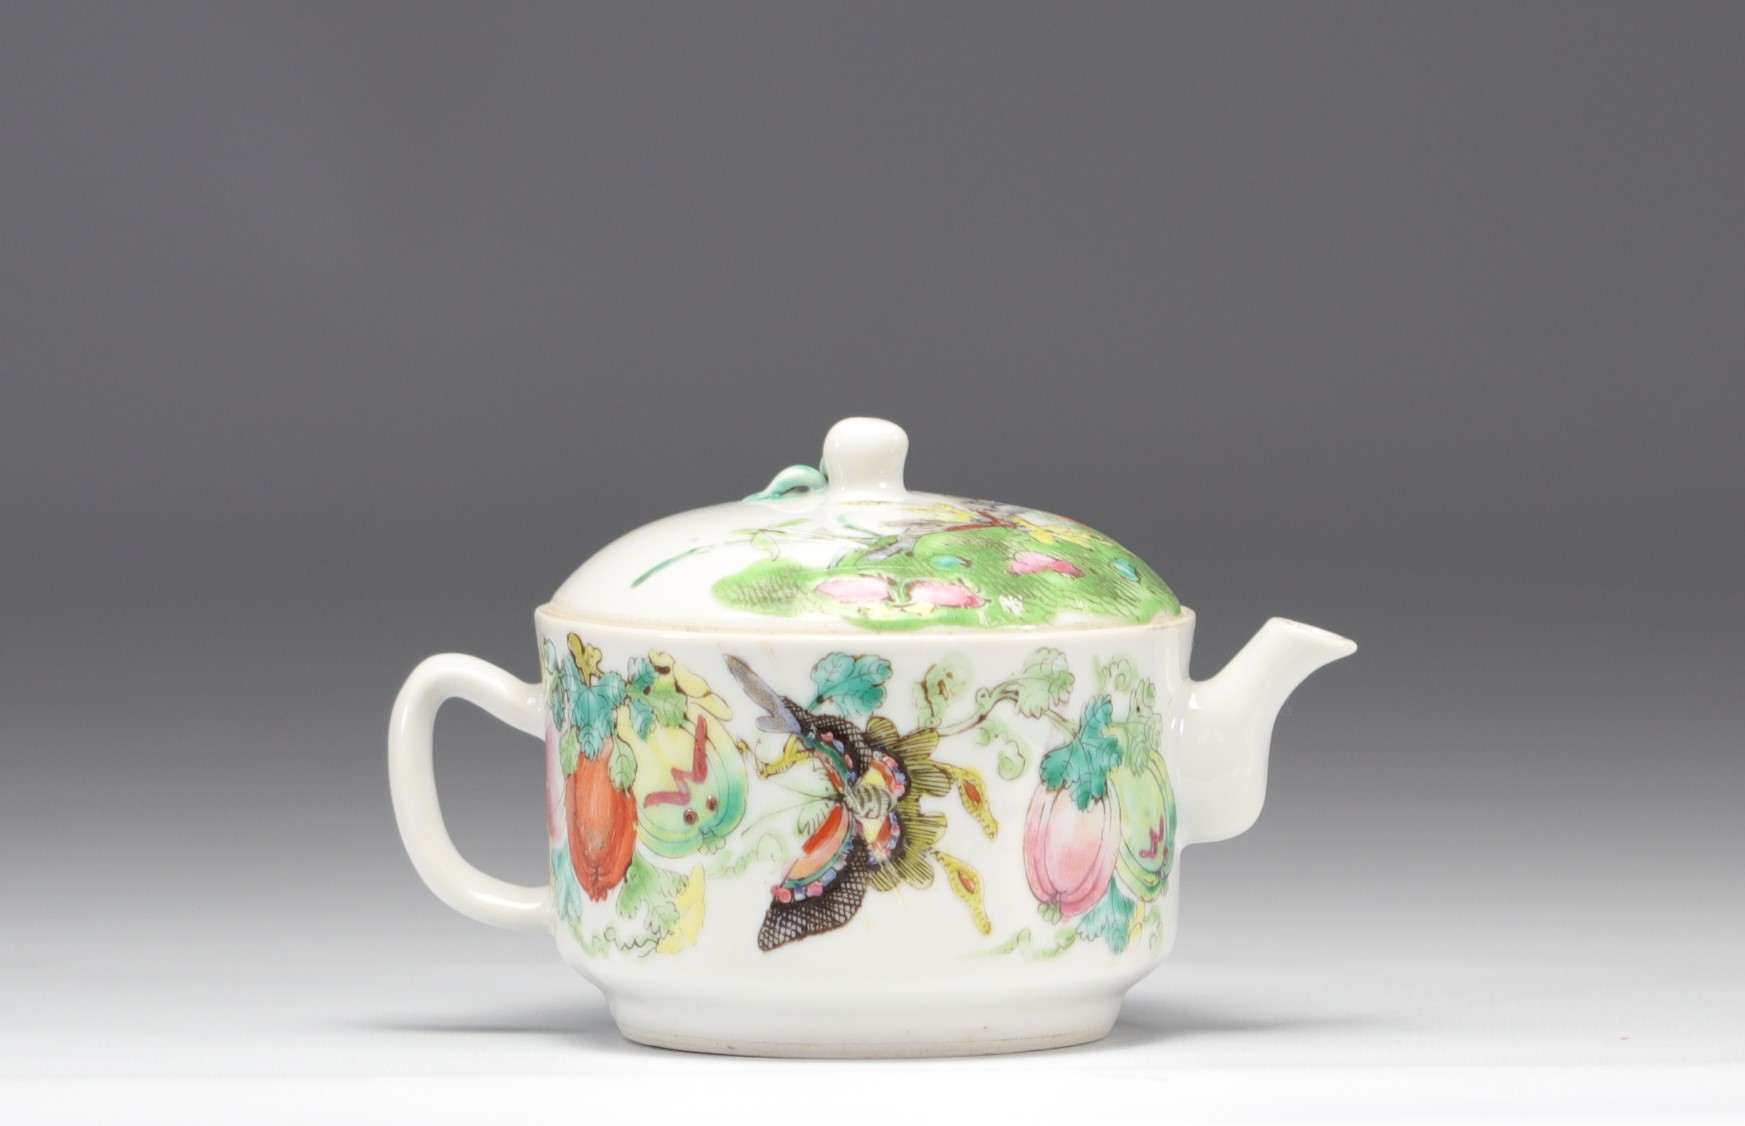 Famille rose porcelain teapot decorated with butterflies and flowers